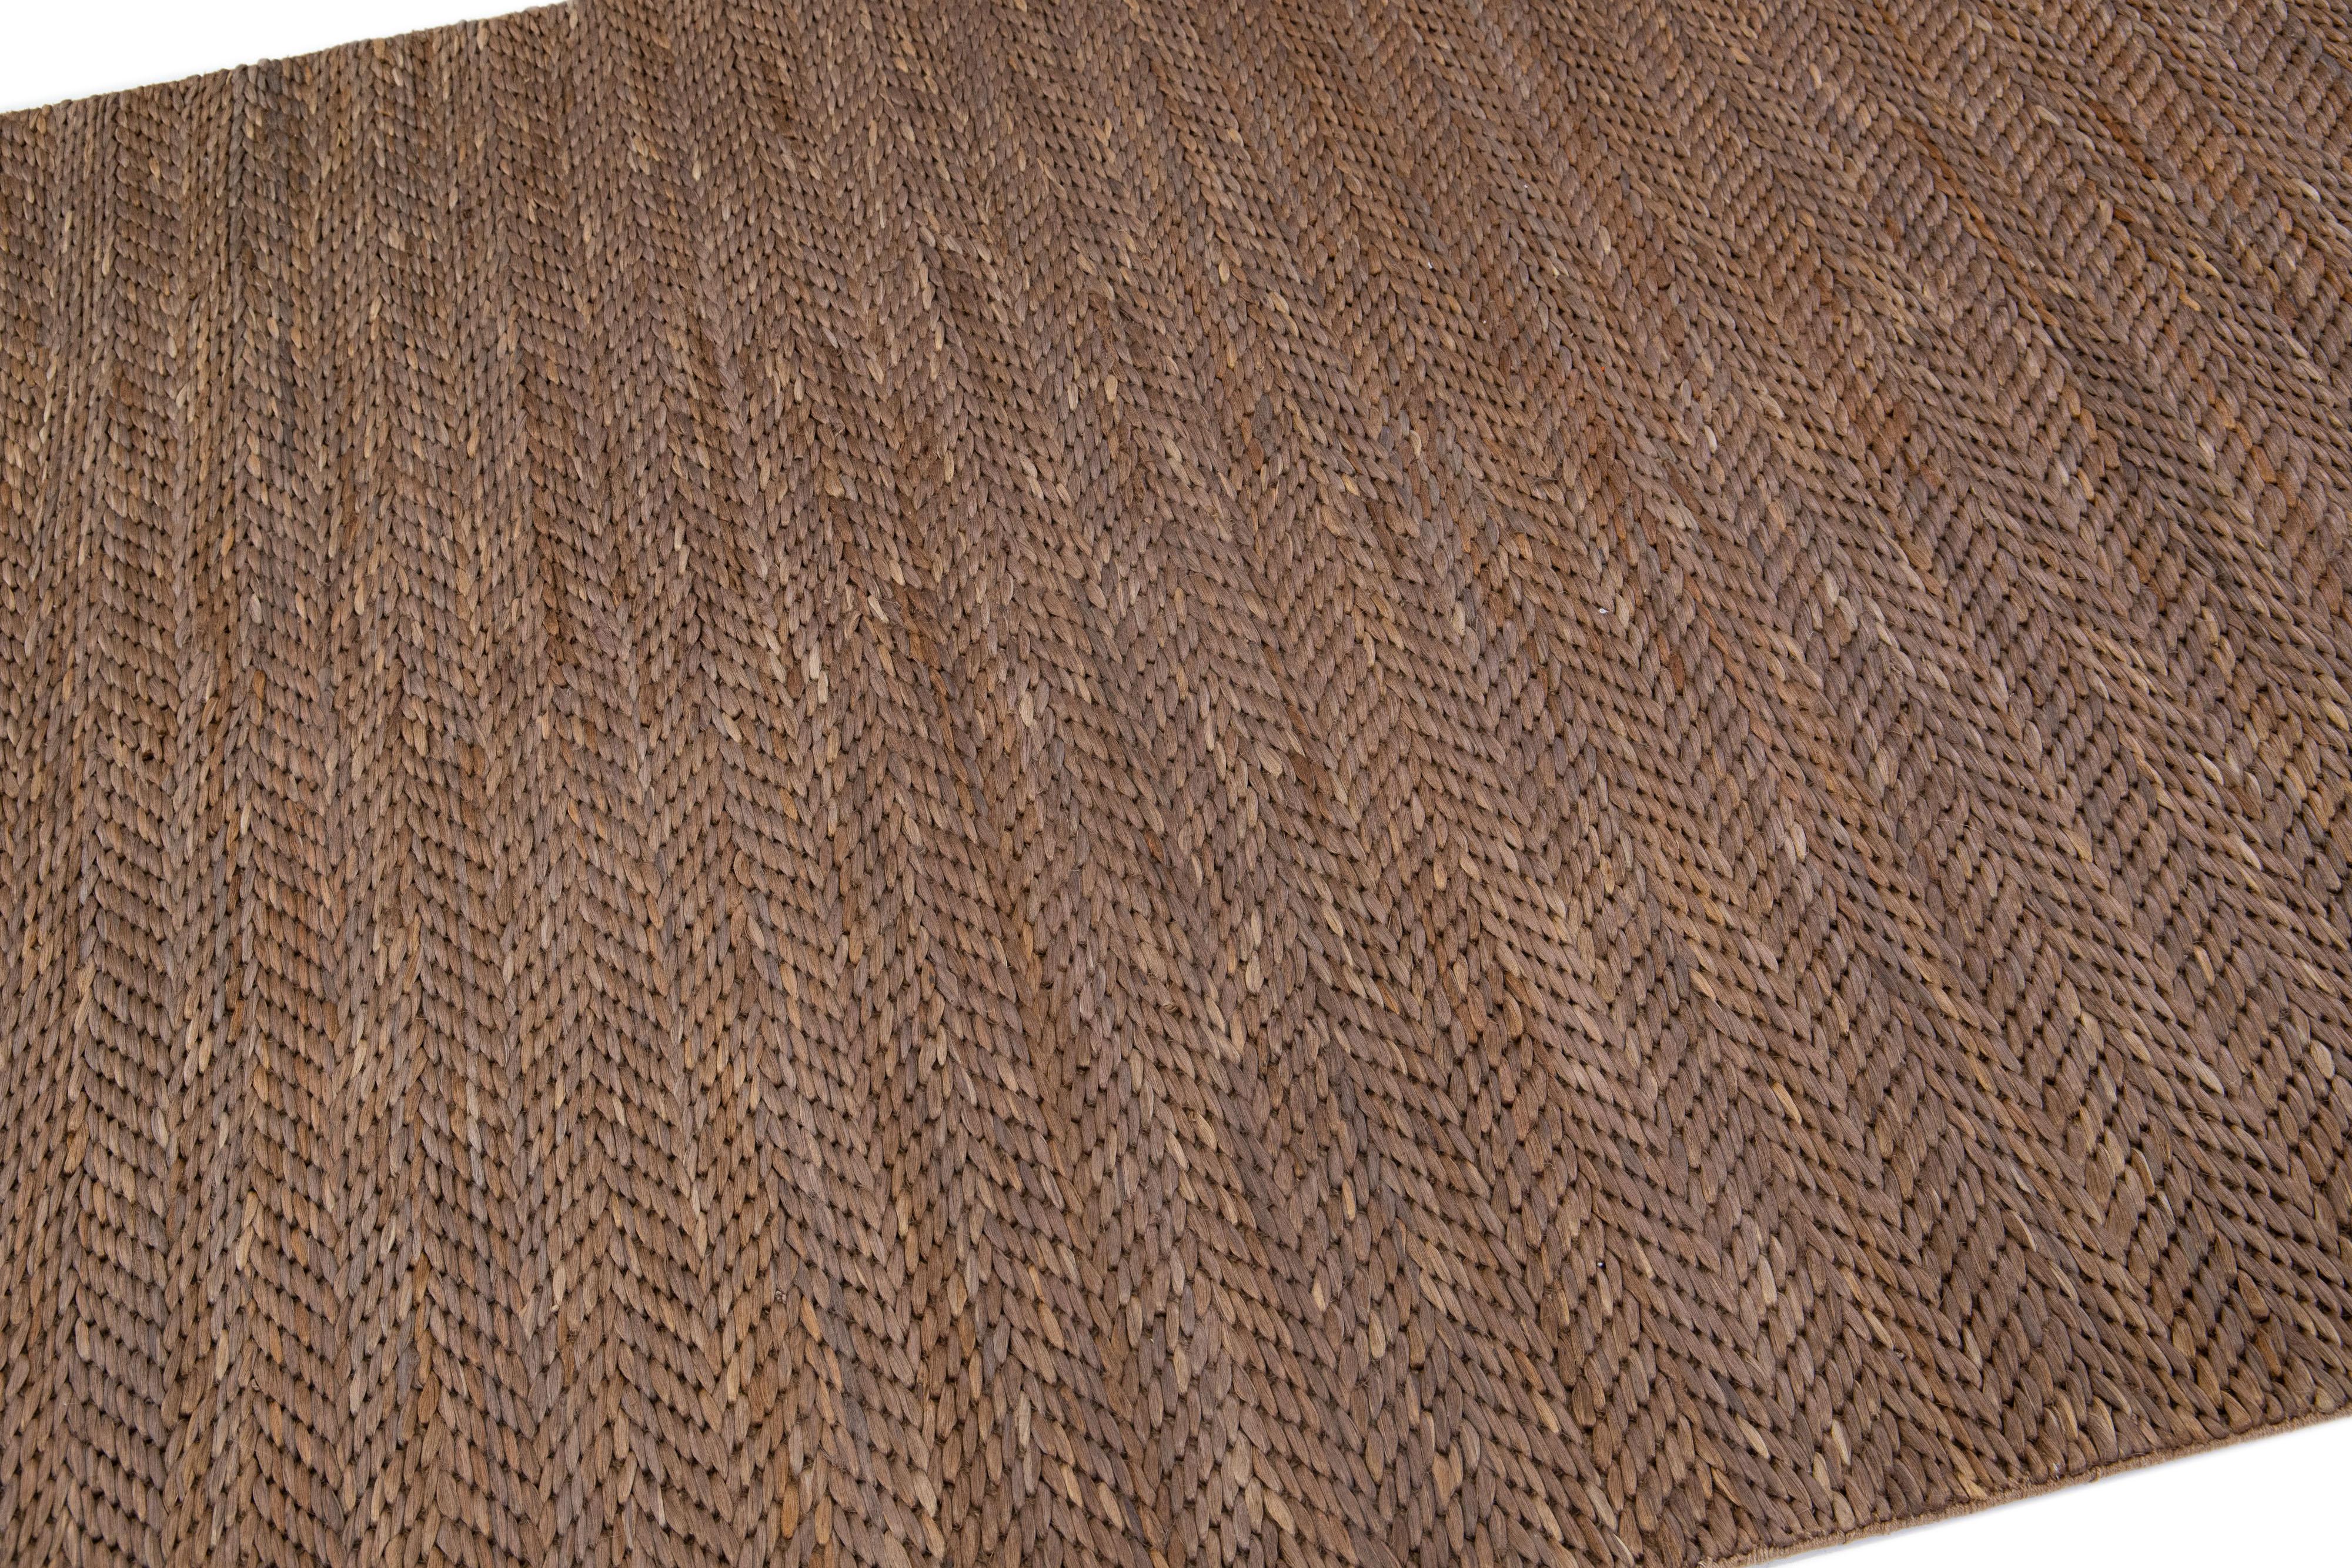 Organic Modern Modern Natural Texture Hand Woven Jute & Cotton Area Rug with Brown Color For Sale